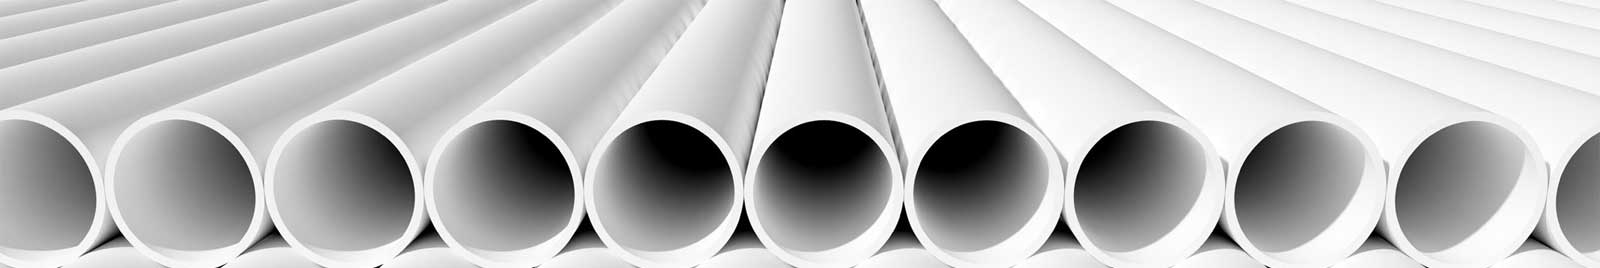 Plumbing Pipes Manufacturers